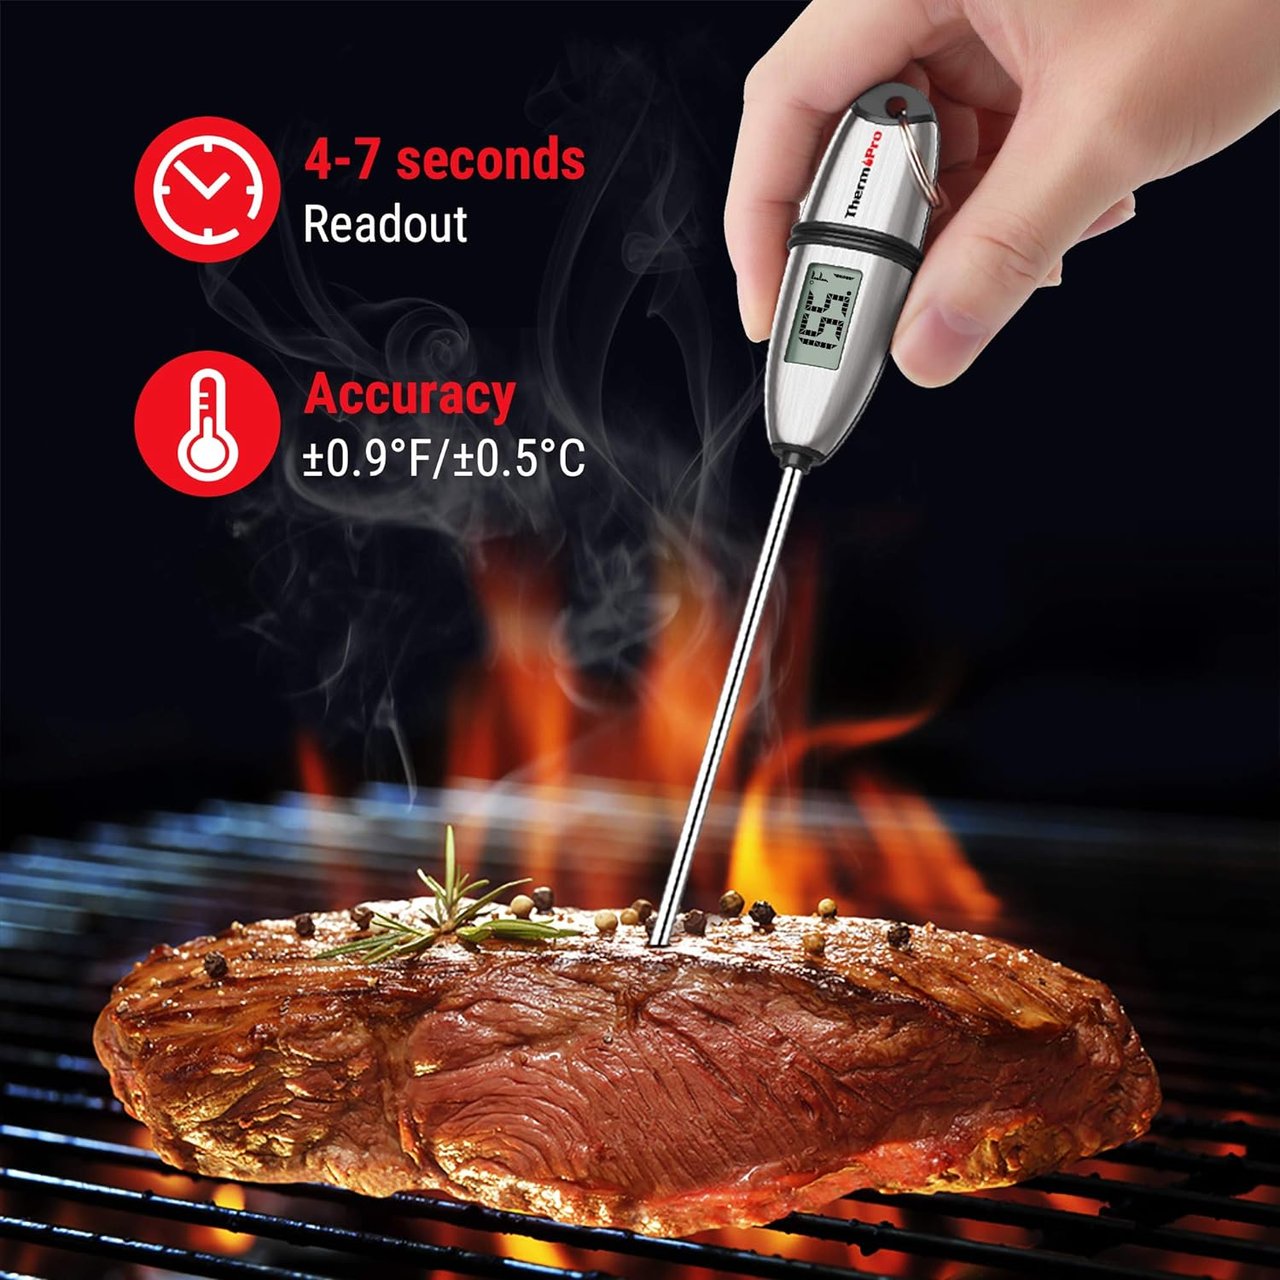 1 ThermoPro Digital Probe Thermometer - Perfect for Cooking and Baking